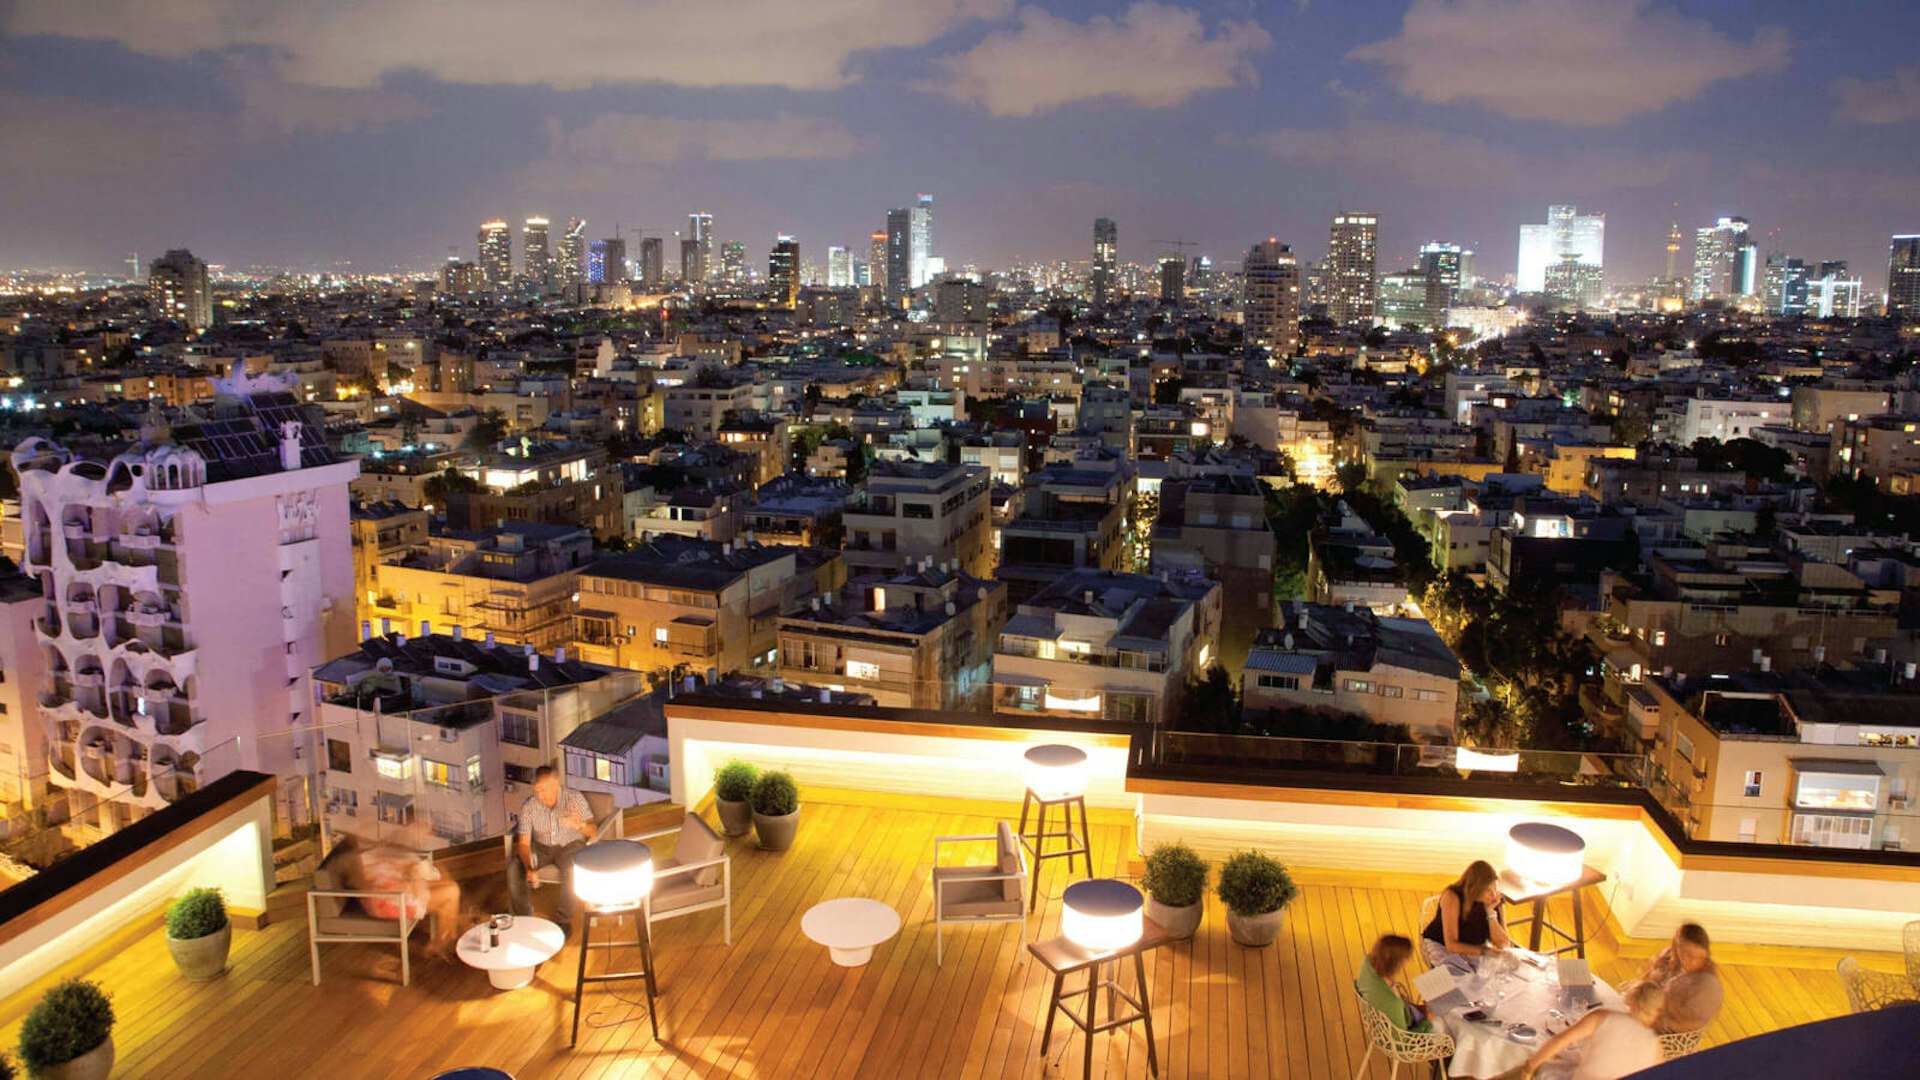 People sit at tables at the Blue Sky restaurant atop the Carlton Tel Aviv hotel